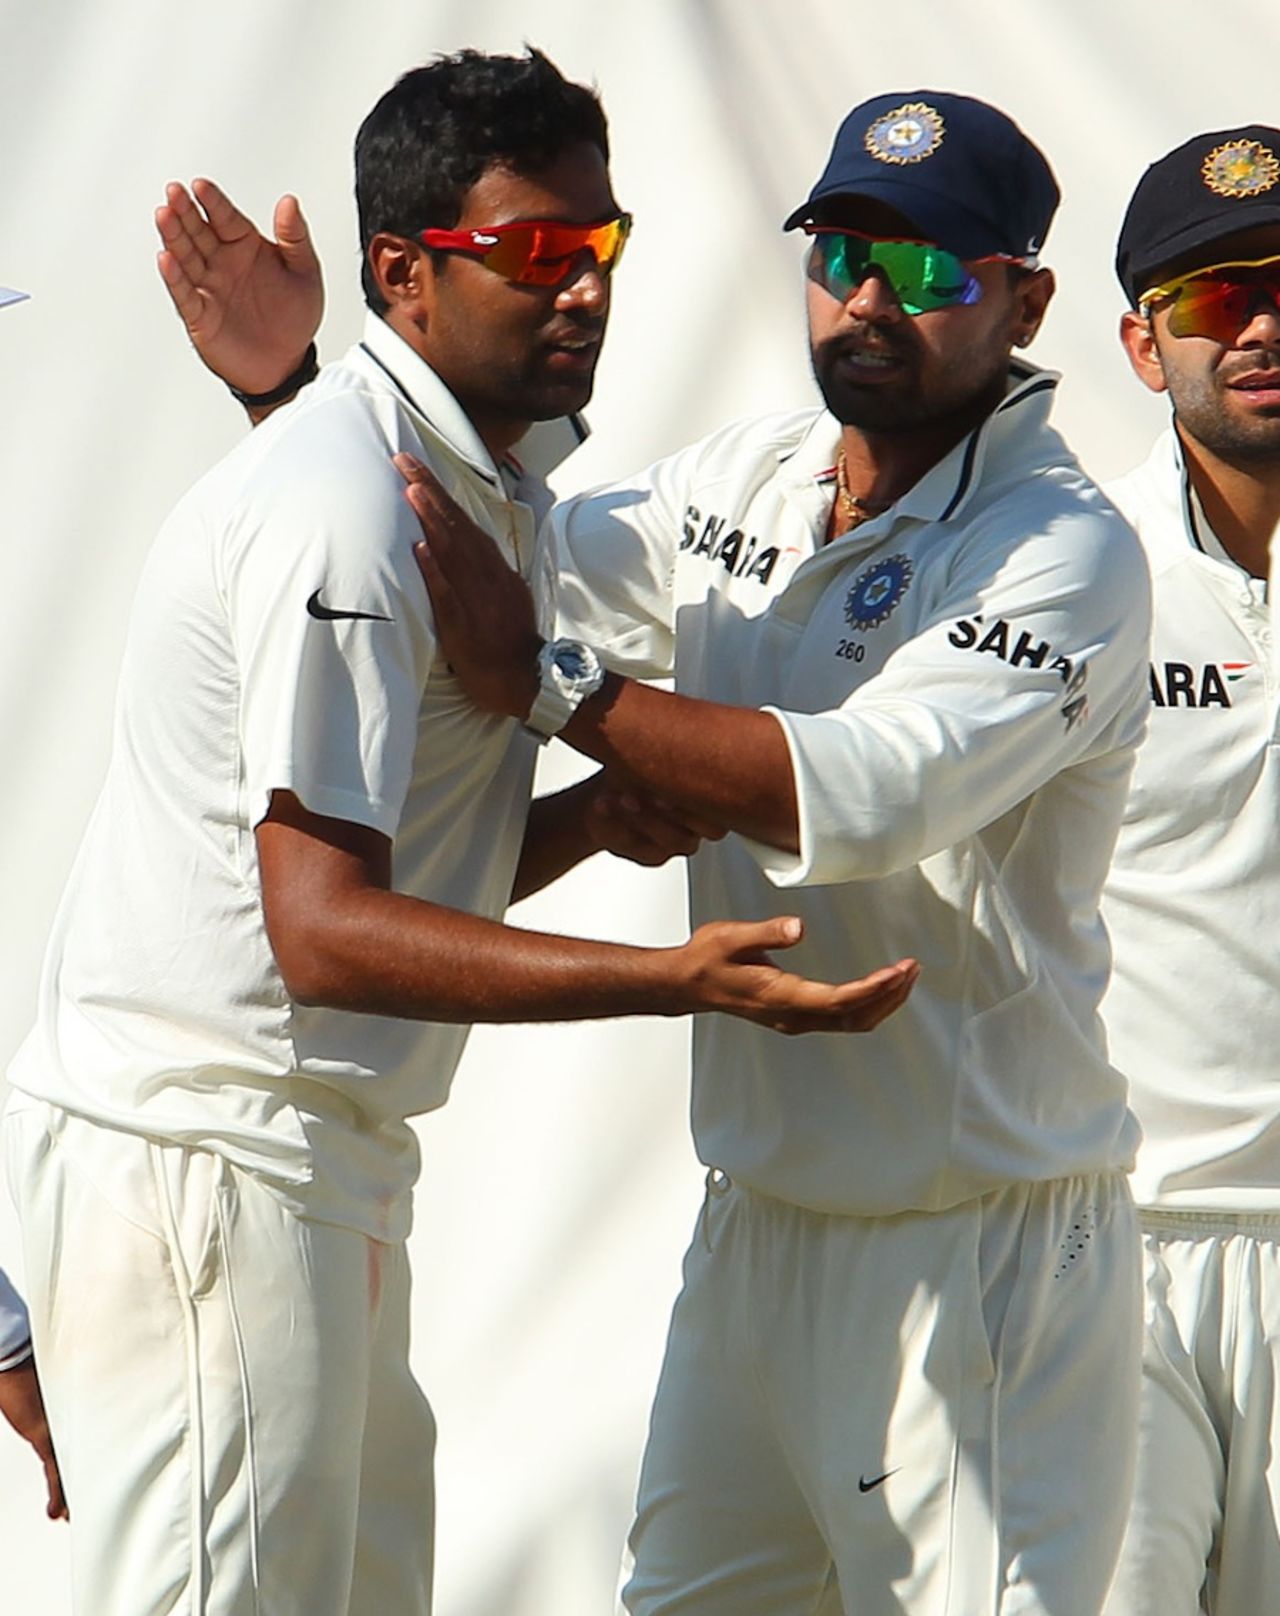 R Ashwin is congratulated by M Vijay after David Warner's wicket, India v Australia, 2nd Test, Hyderabad, 3rd day, March 4, 2013